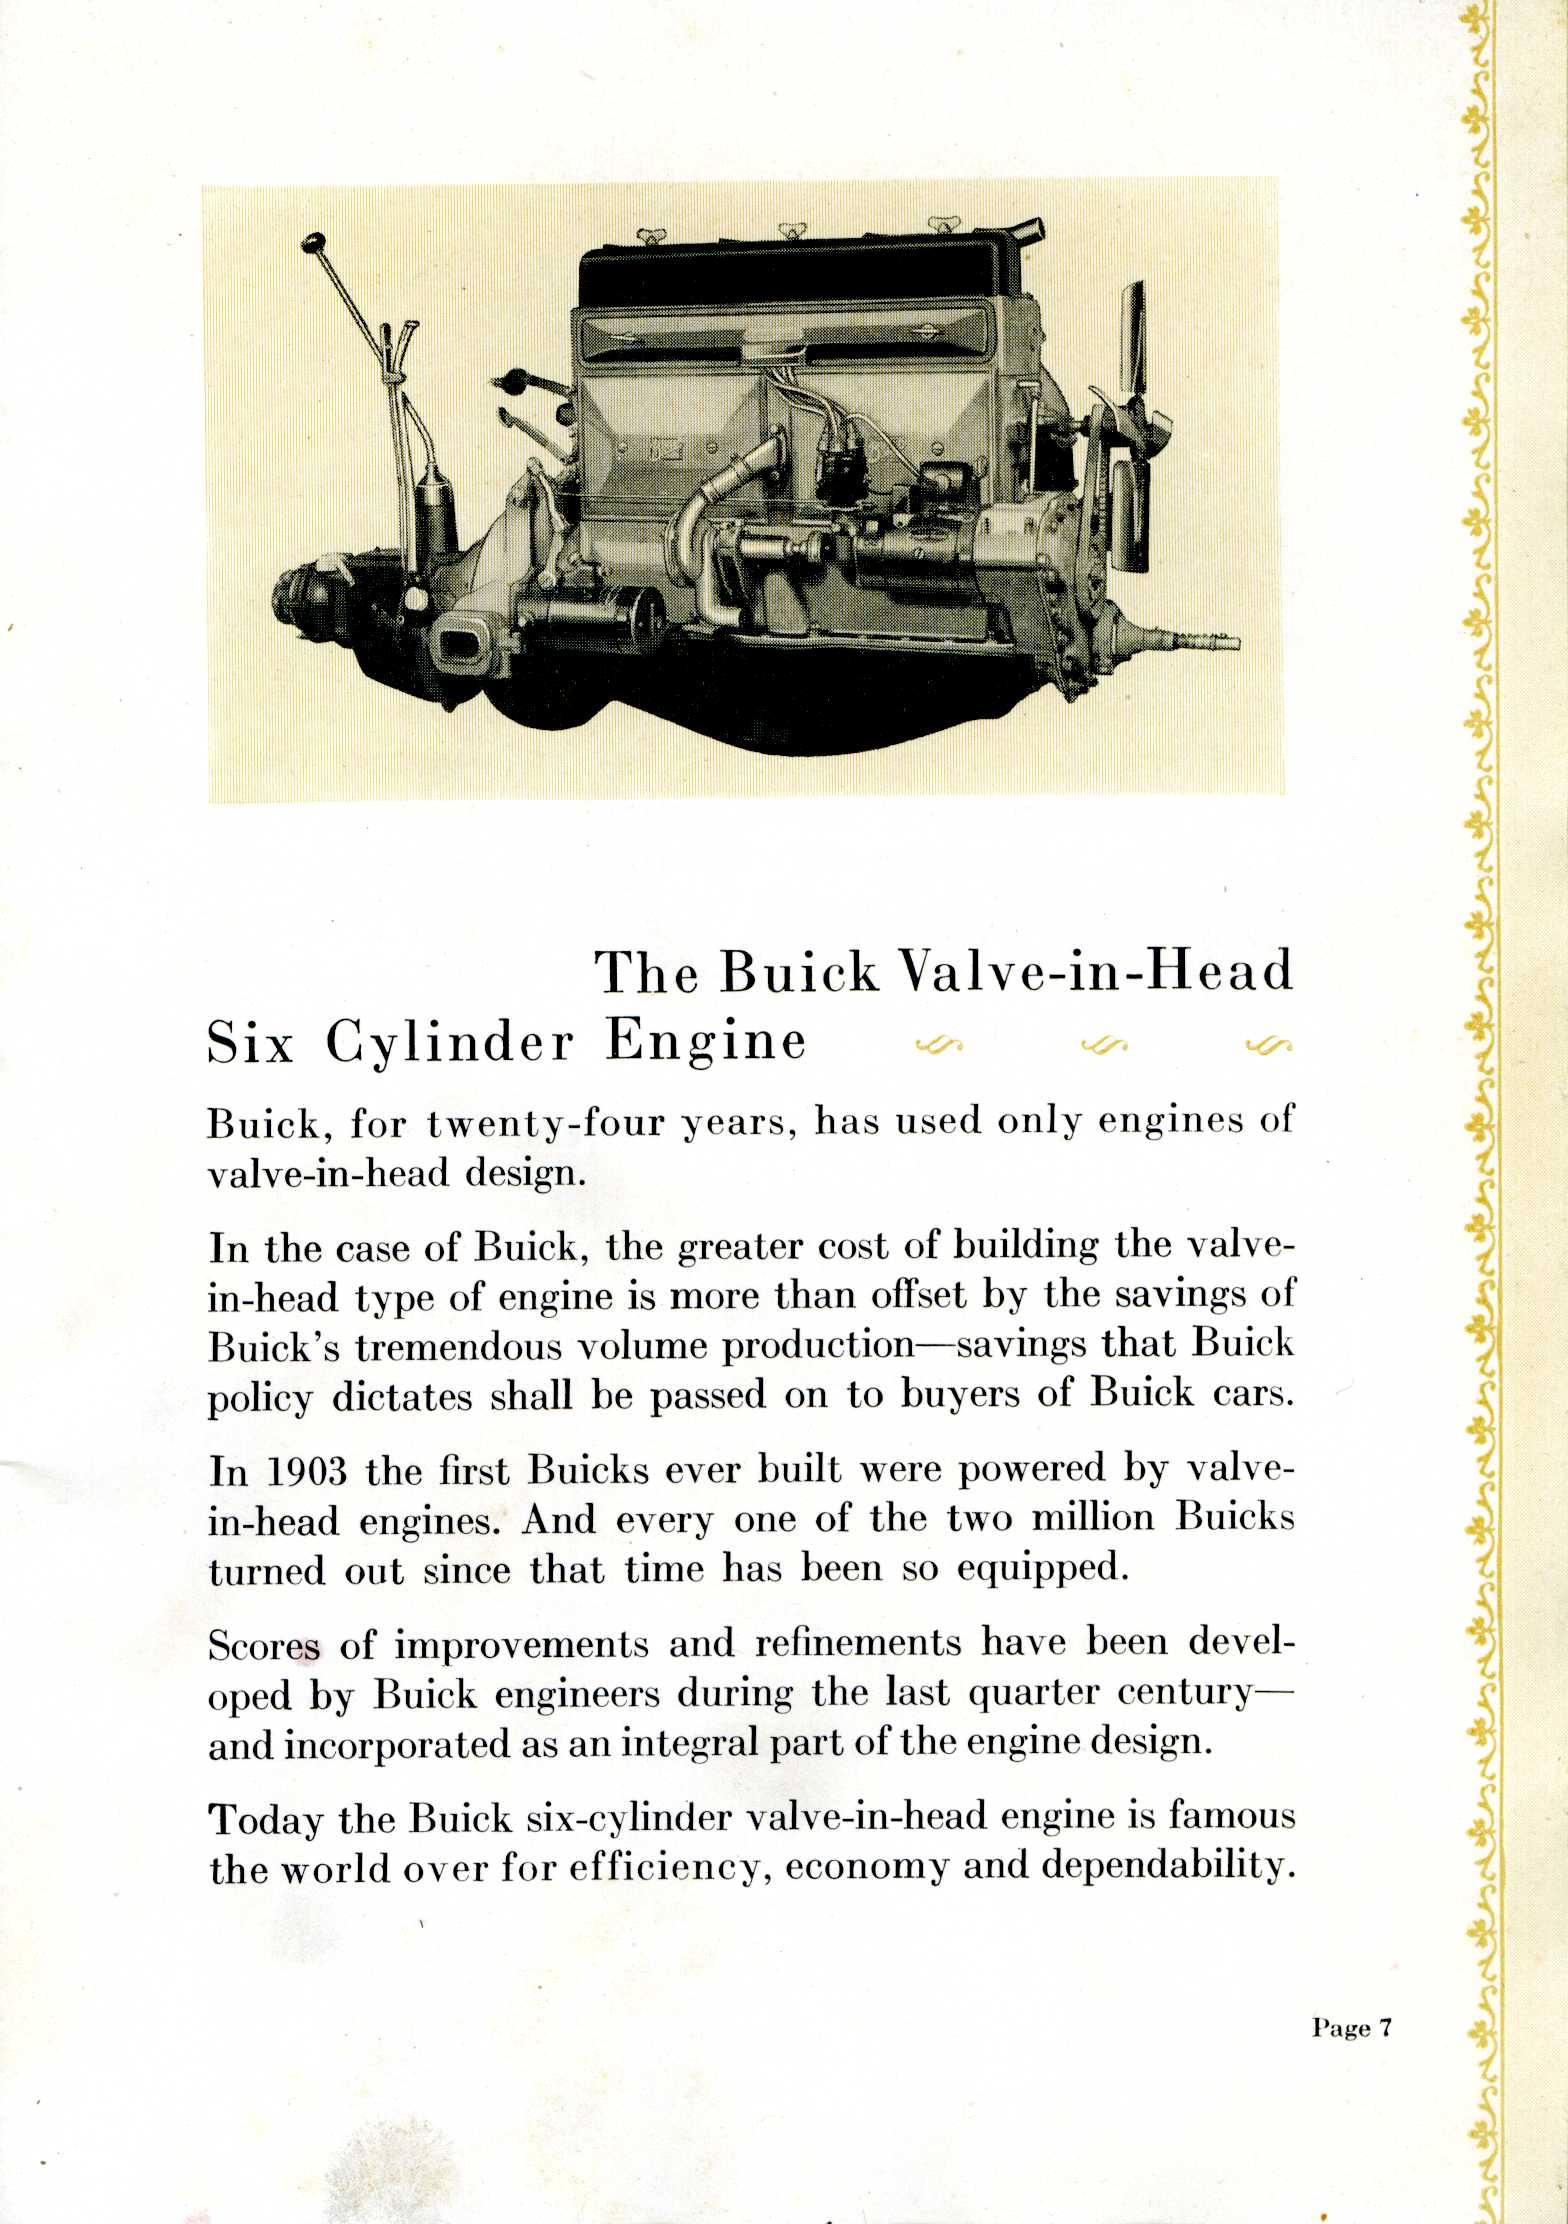 1928 Buick-How to Choose a Motor Car Wisely-07